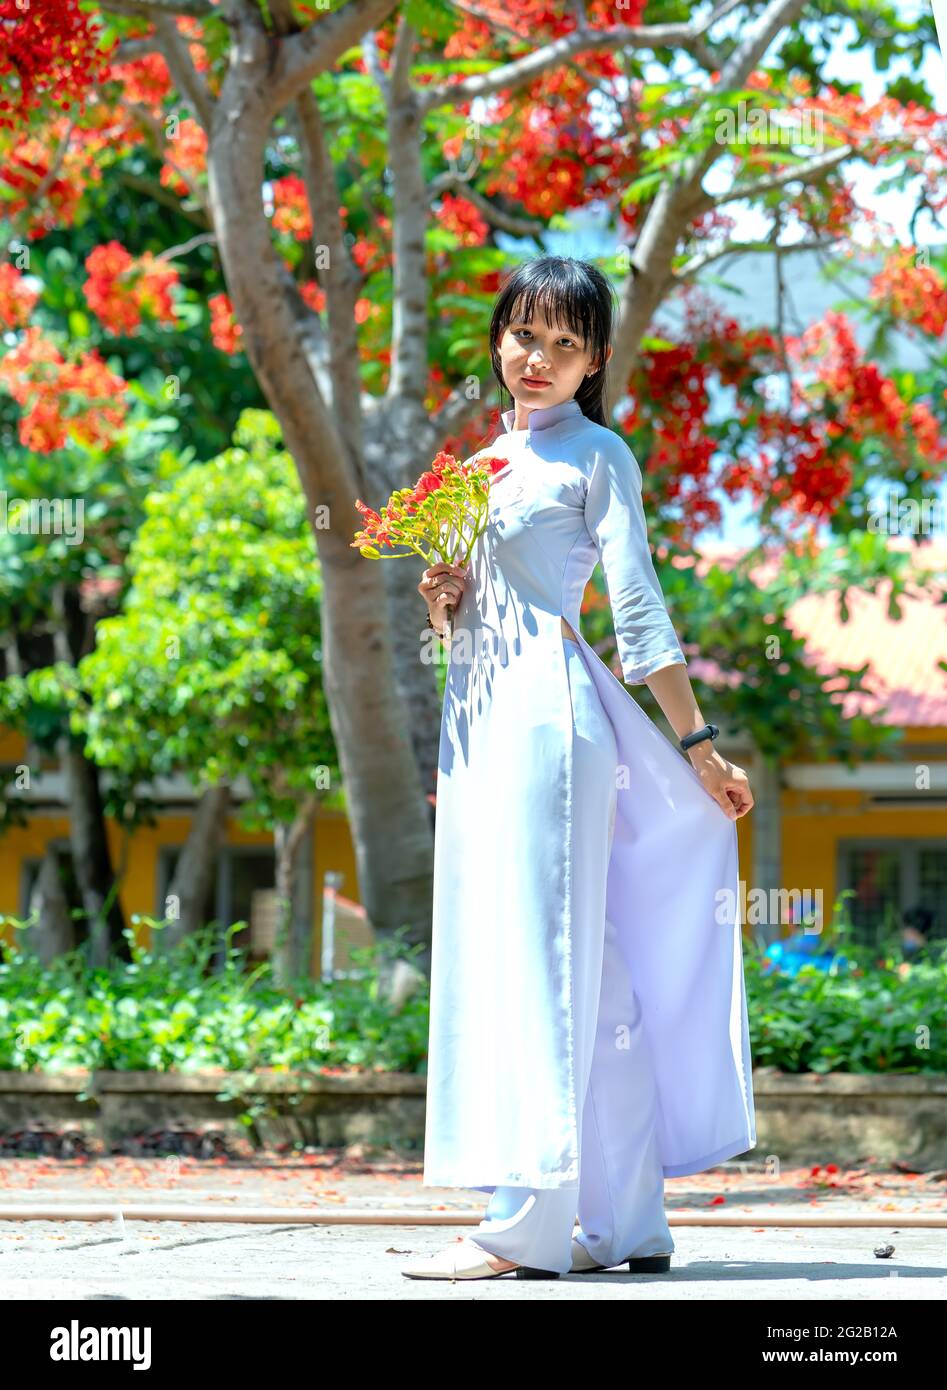 Schoolgirls in traditional long dress or Ao Dai uniform posing with flowers  phoenix school yard mark time students remain timeless in Long An, Vietnam  Stock Photo - Alamy